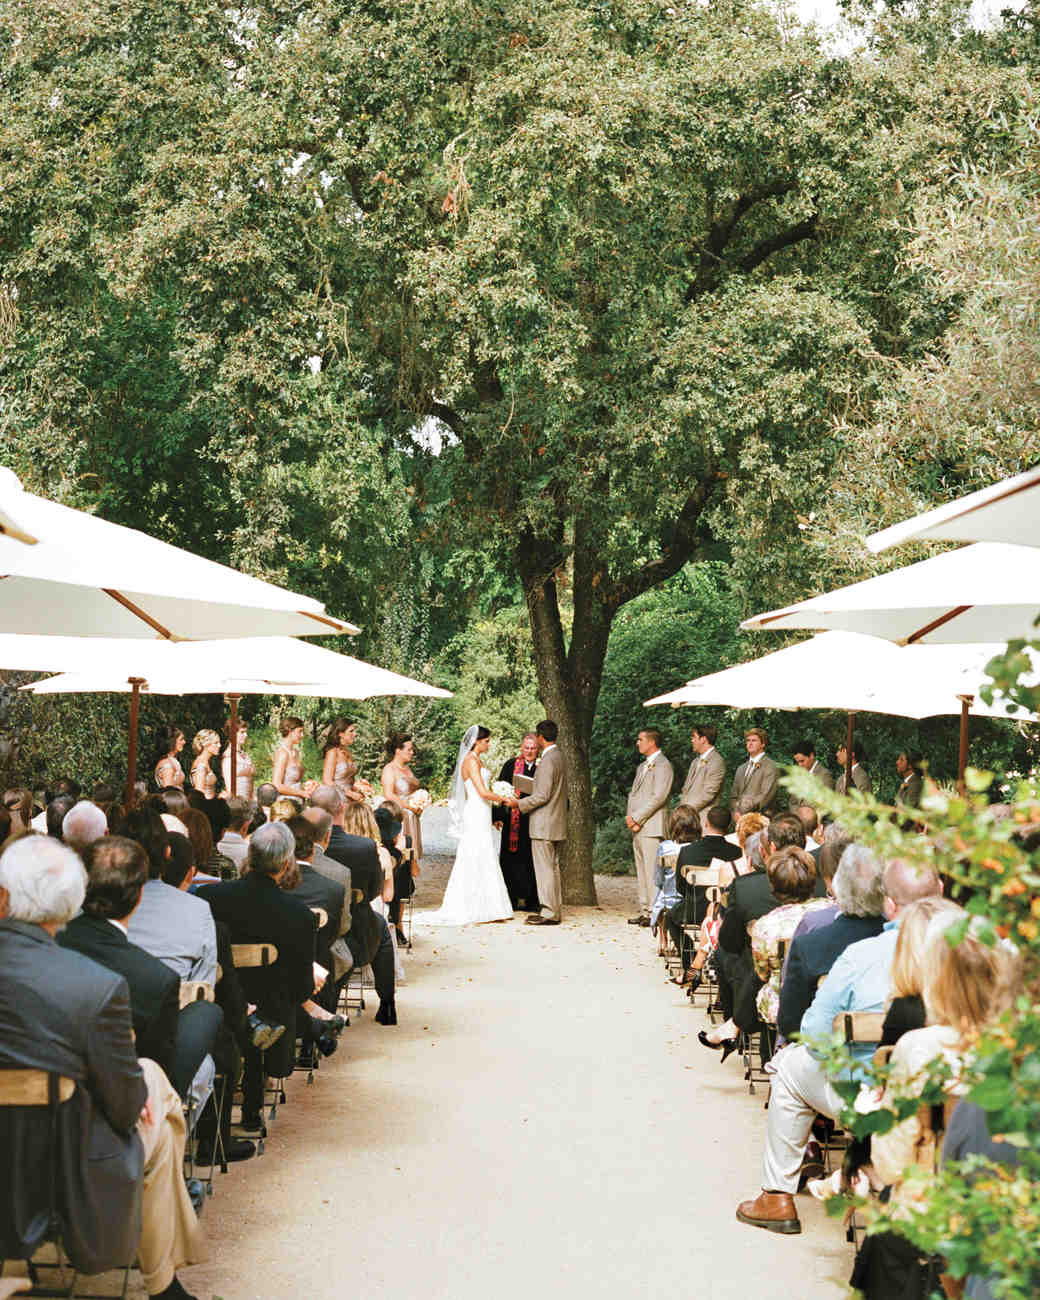 A Romantic Rustic Wedding At A Winery In California Martha